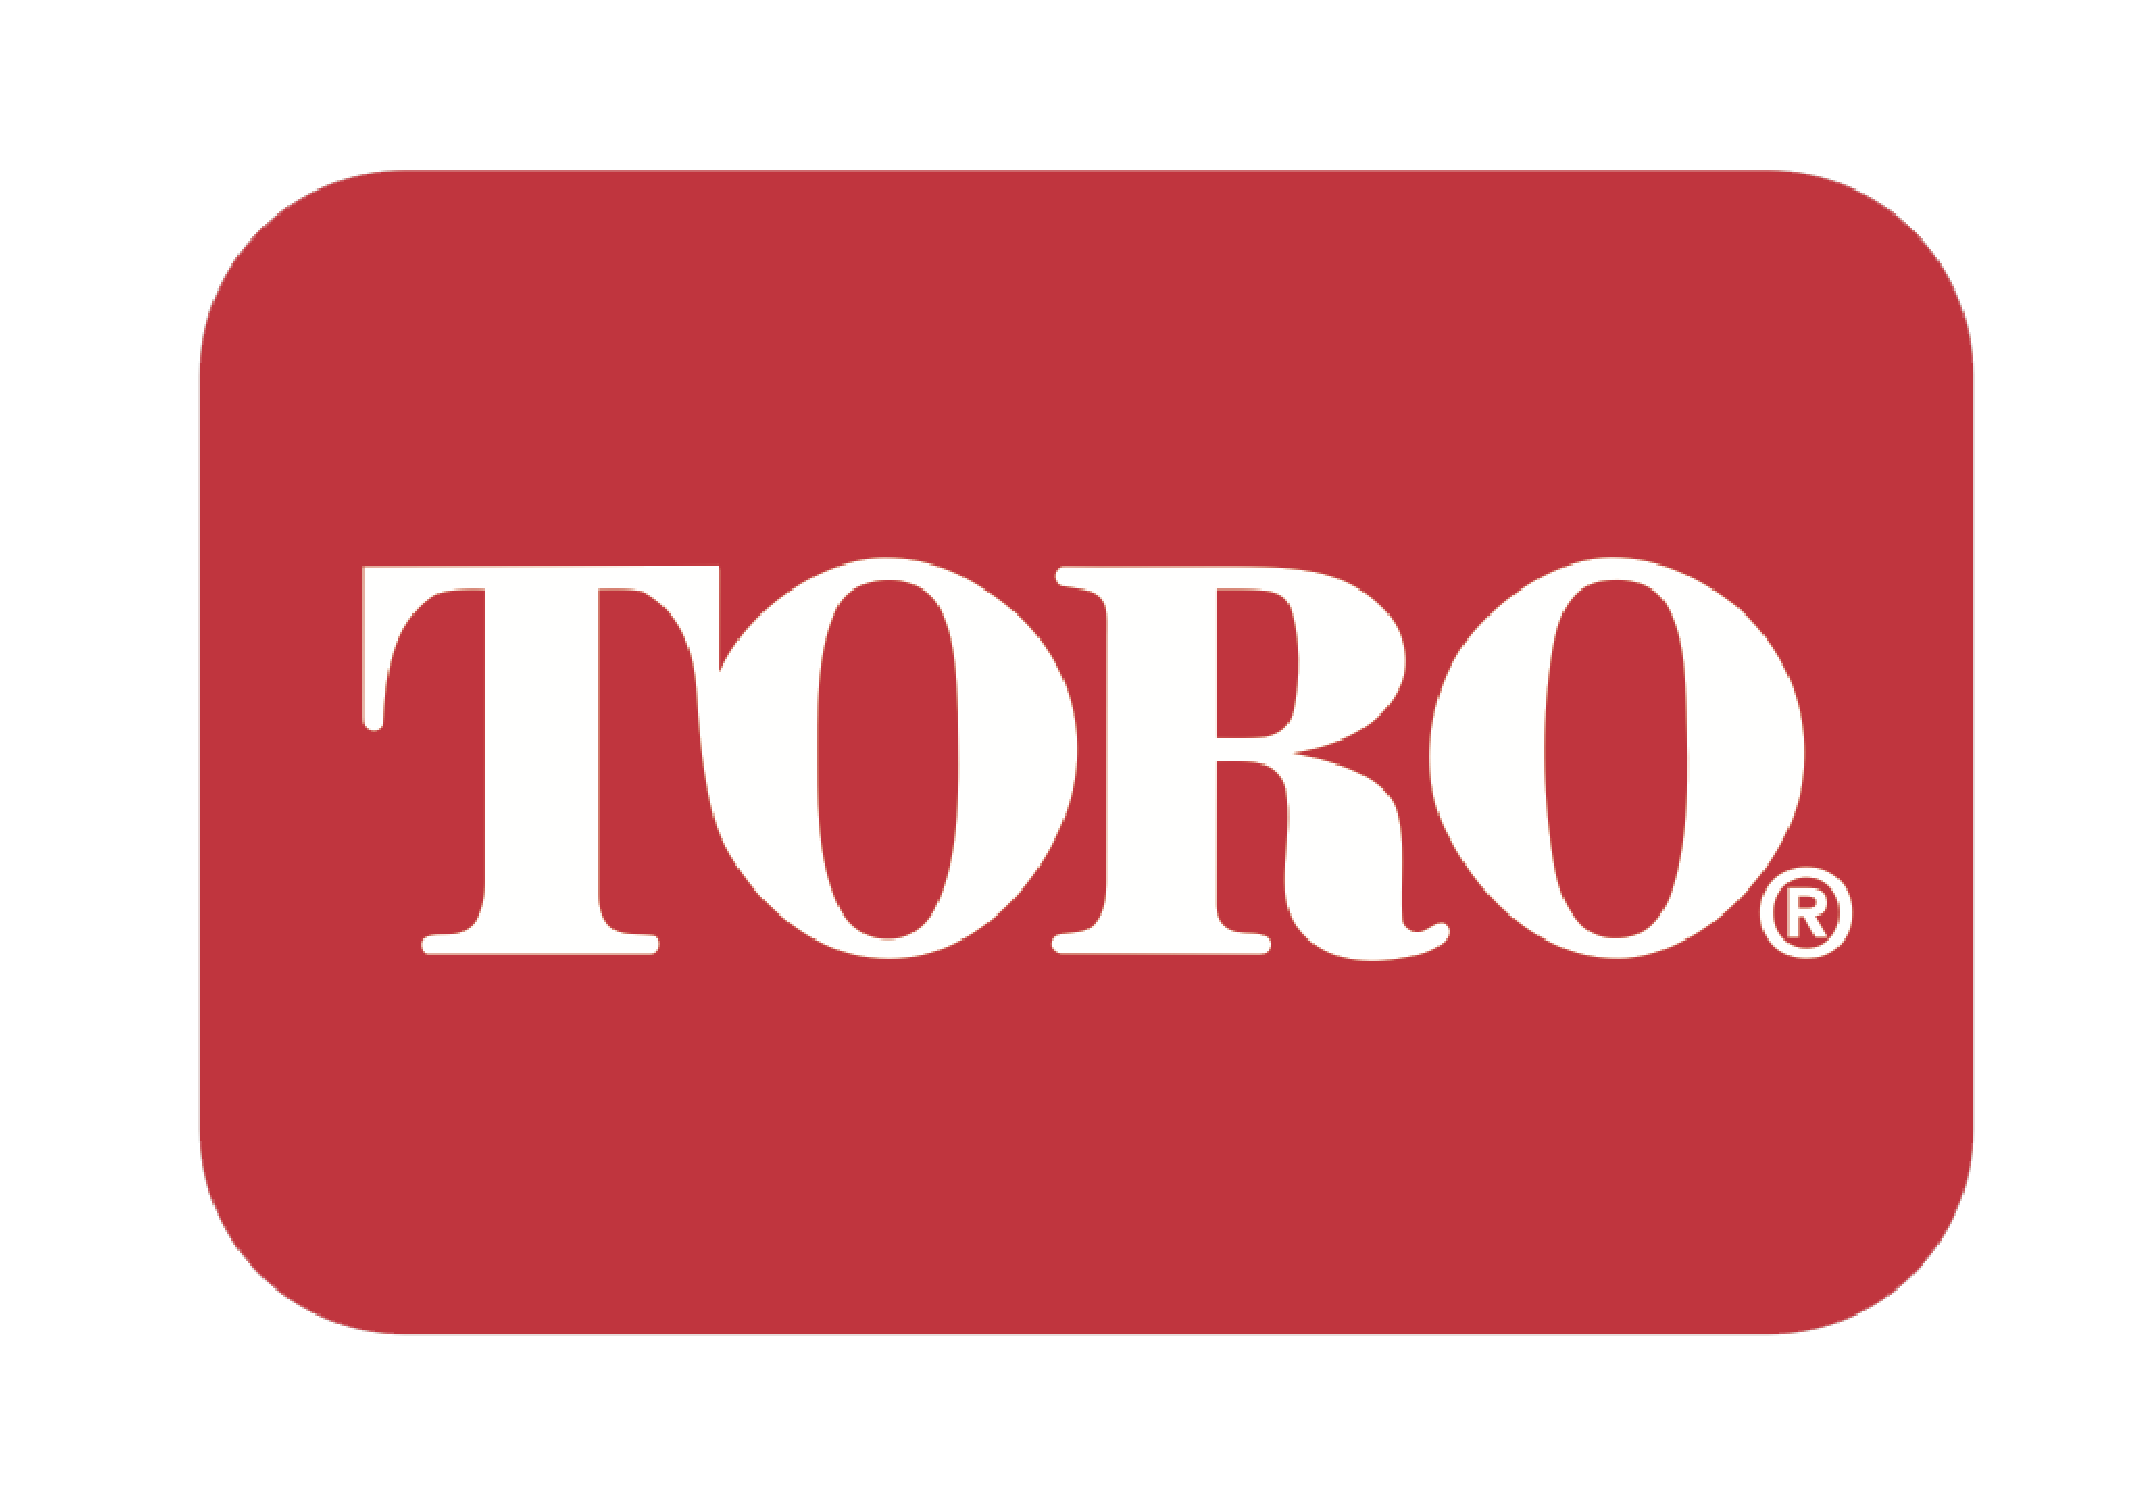 Toro for sale in York, Lancaster, and Hanover, PA & Frederick, MD